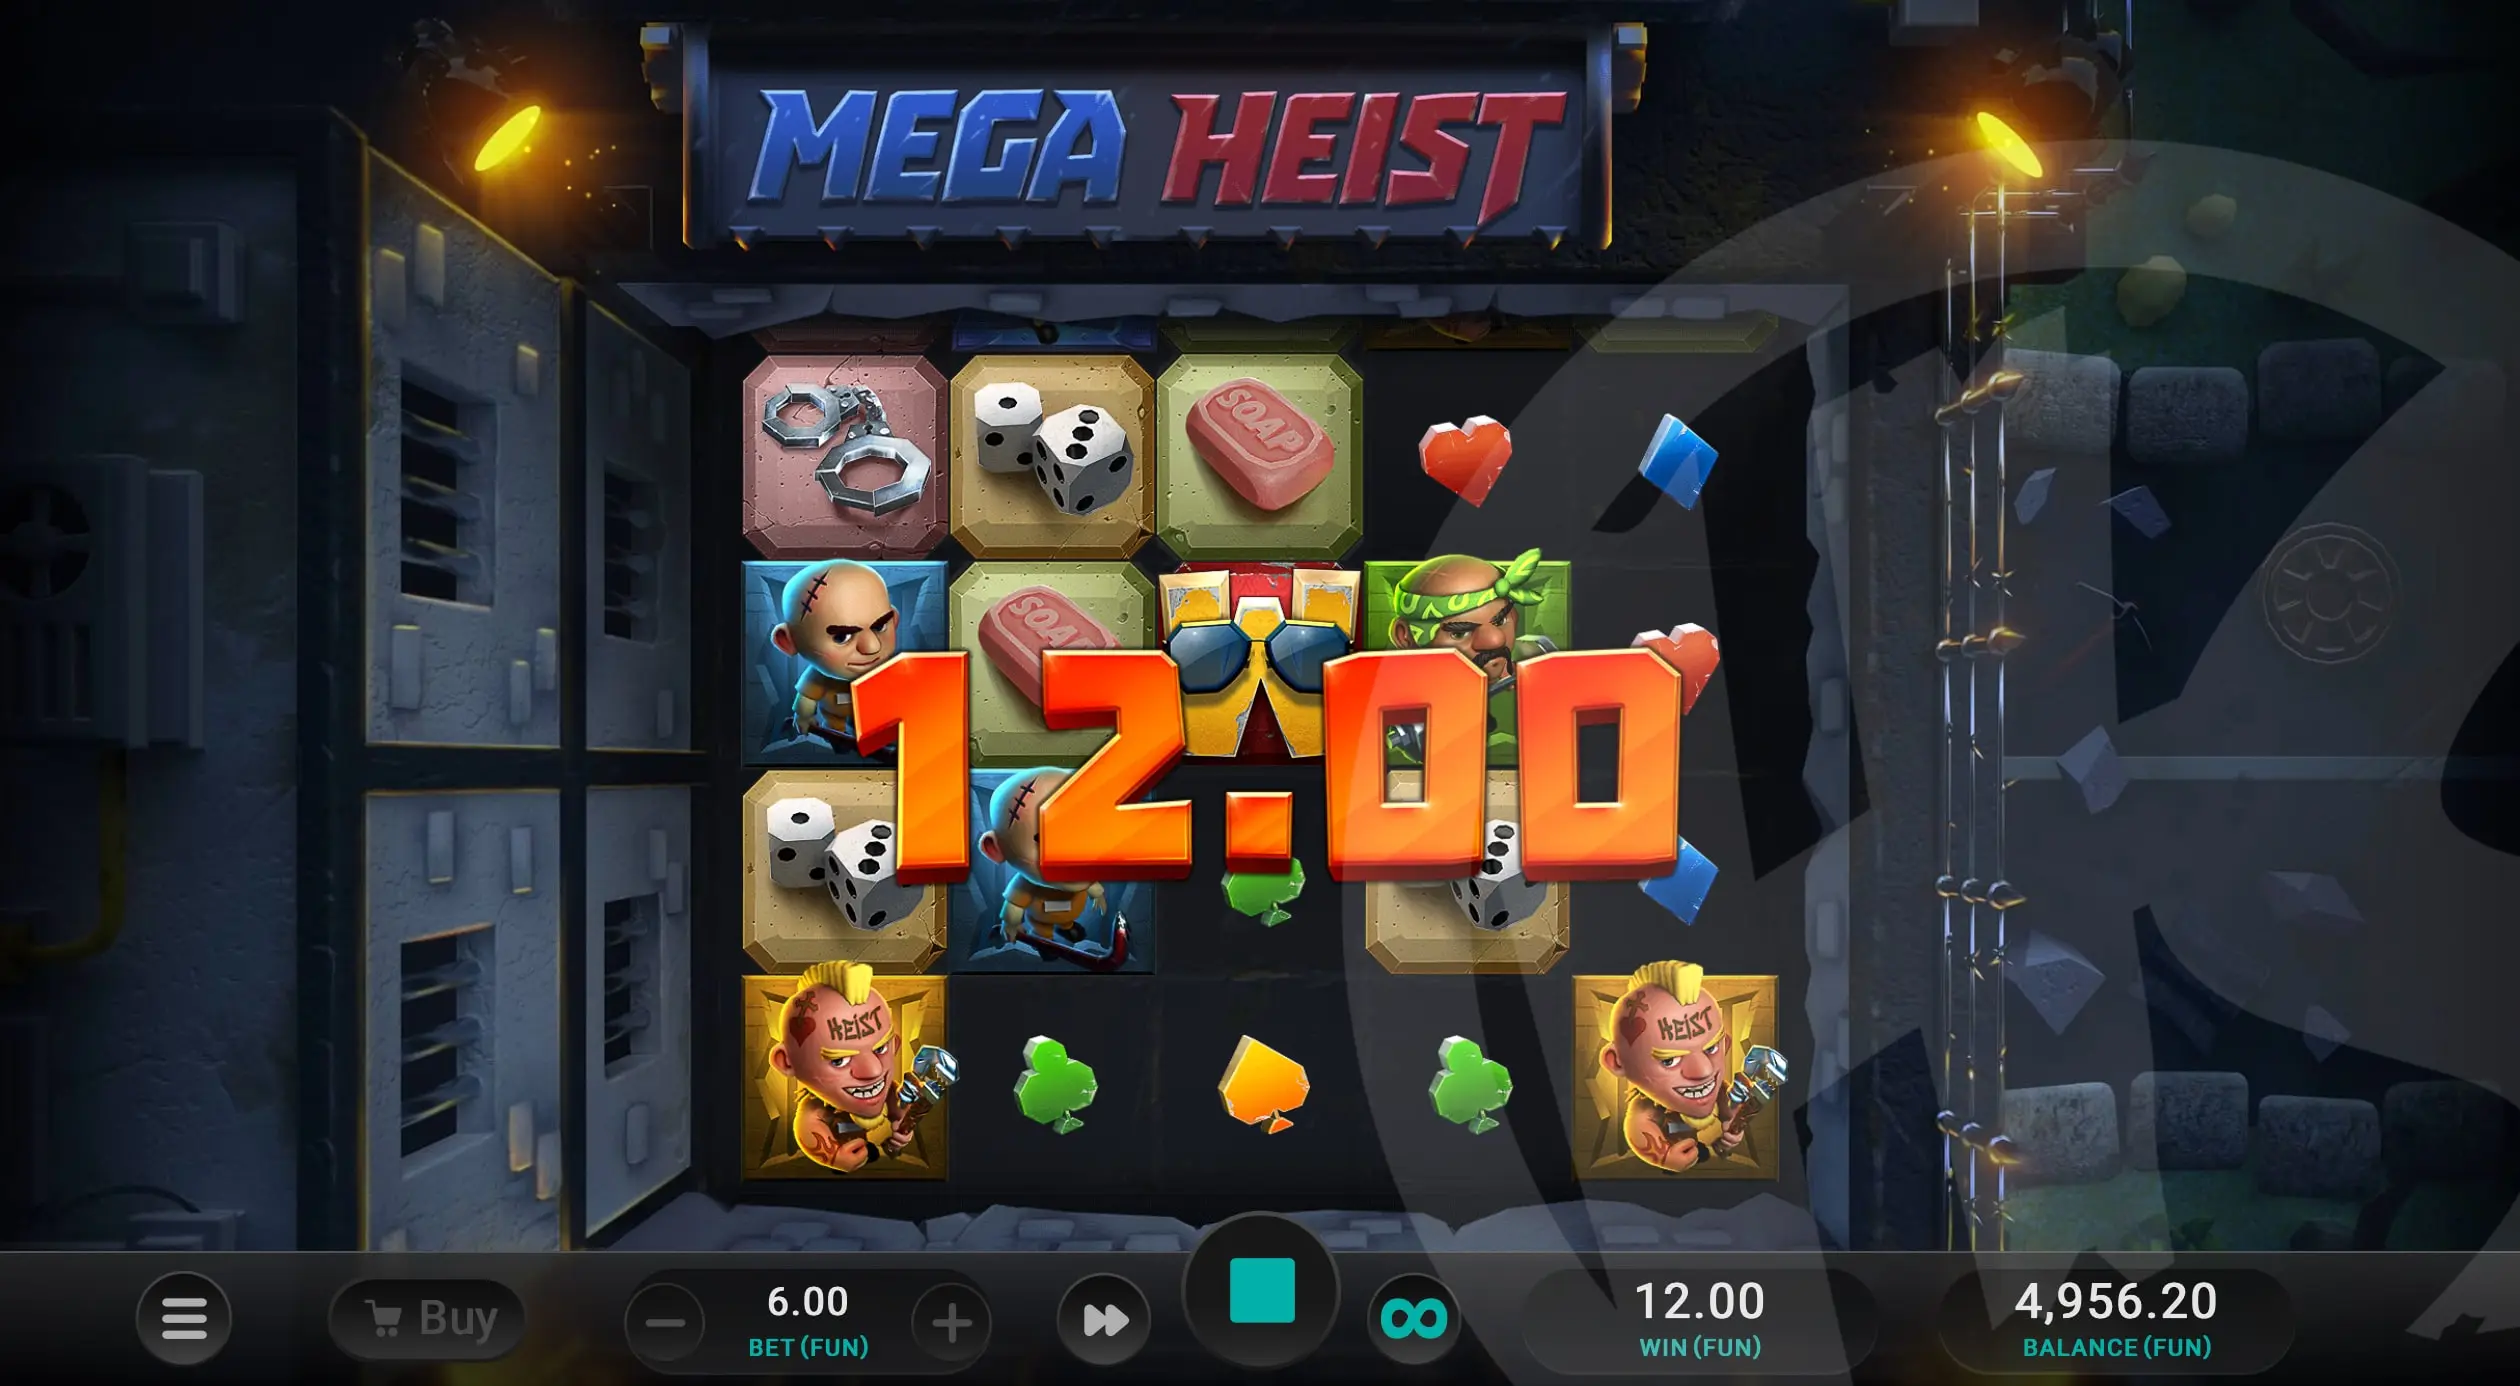 Mega Heist Offers Players 178 Connected Ways to Win